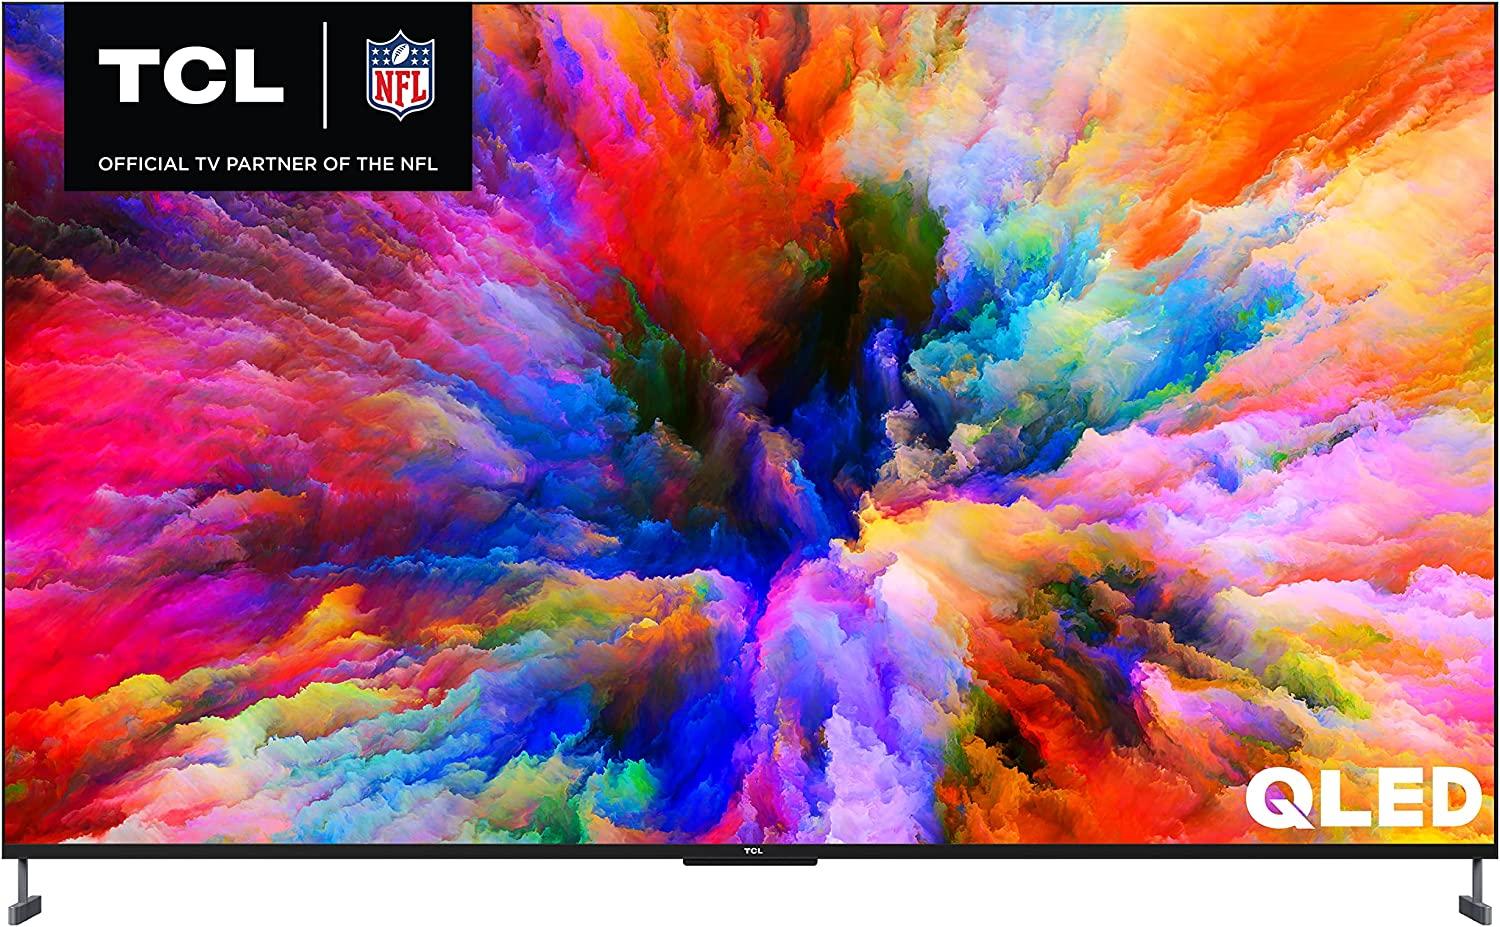 98in TCL Class XL Collection 4K UHD Smart Google TV for $4999.99 Shipped